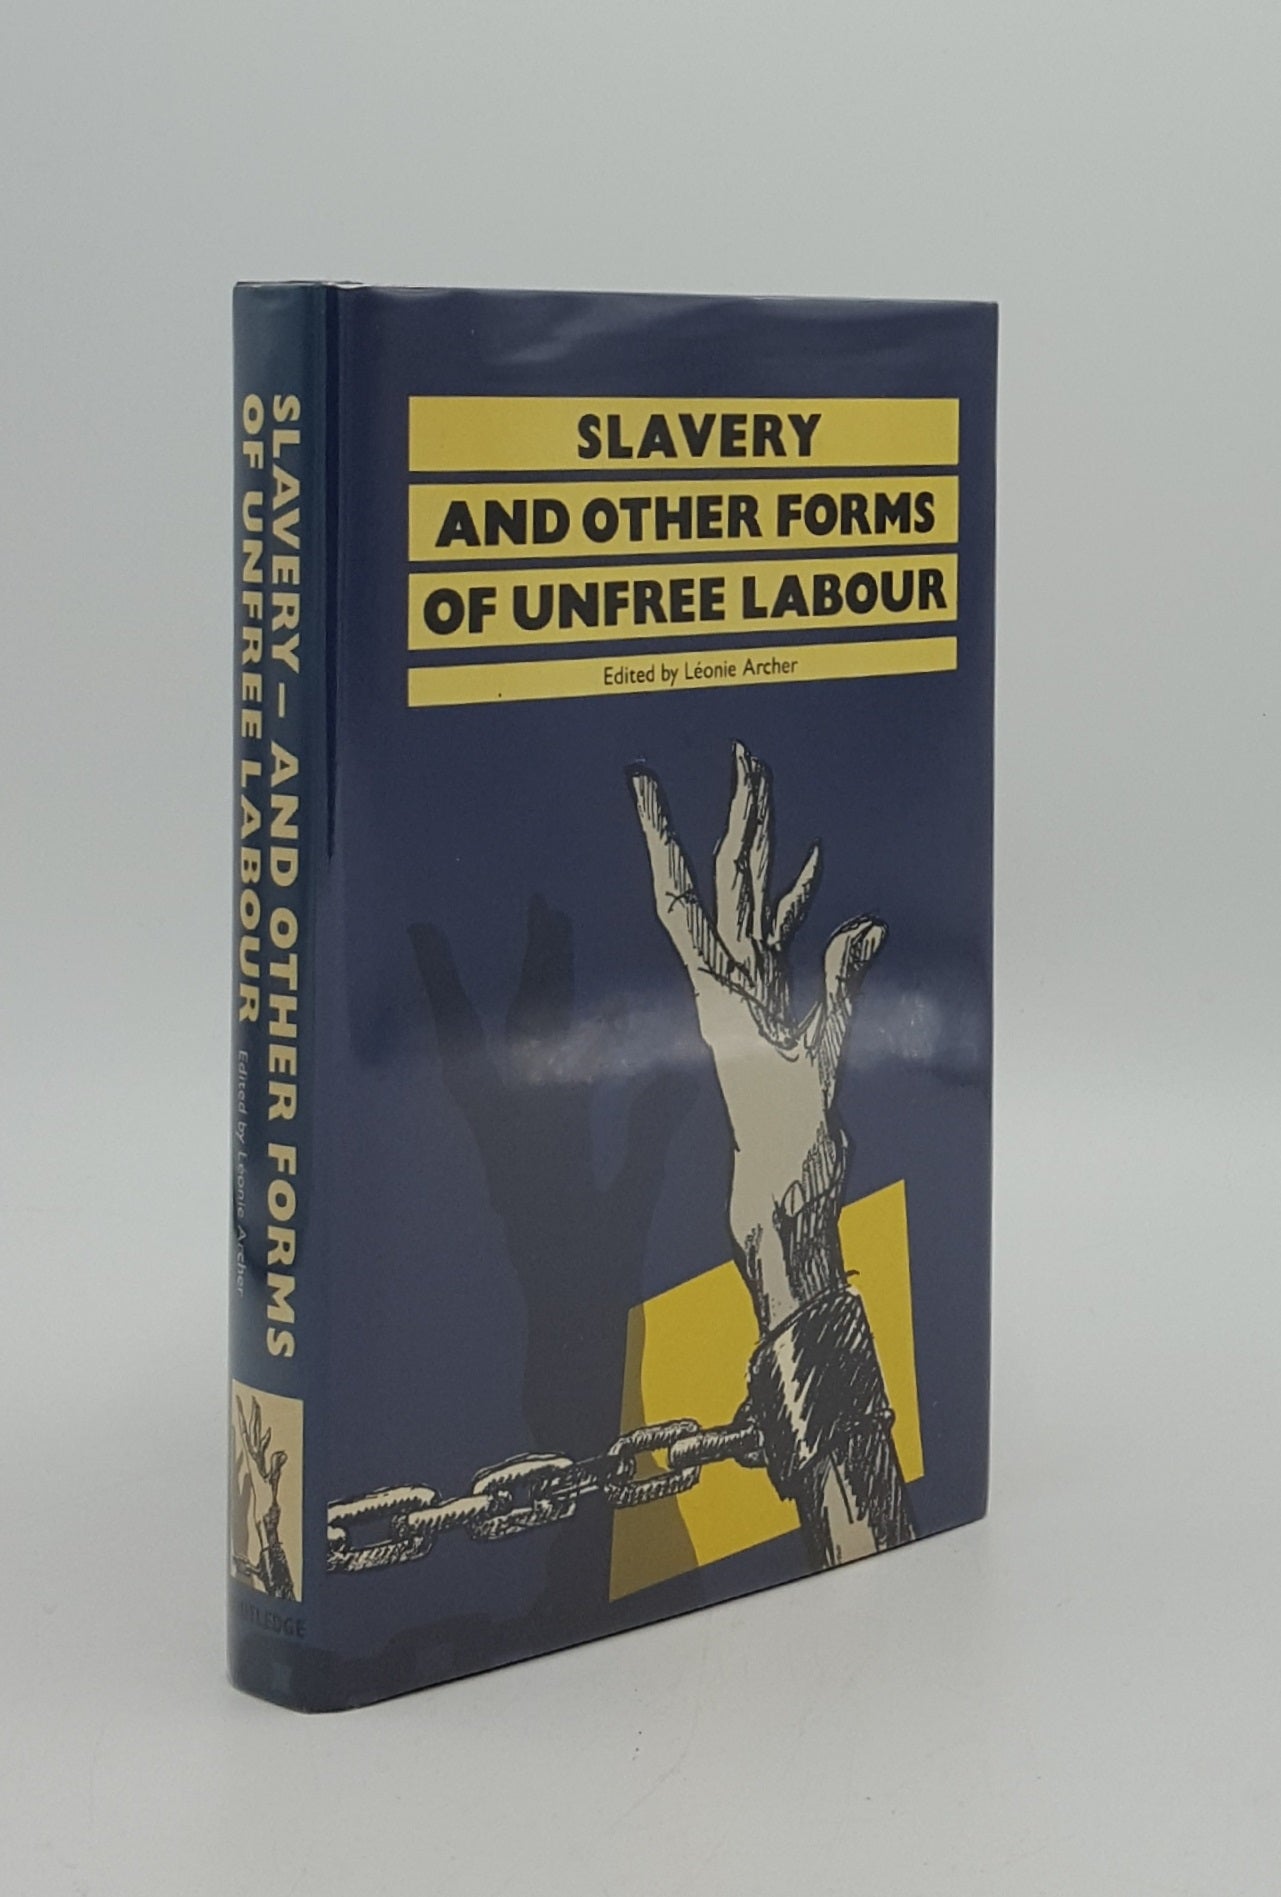 ARCHER Leonie J. - Slavery and Other Forms of Unfree Labour